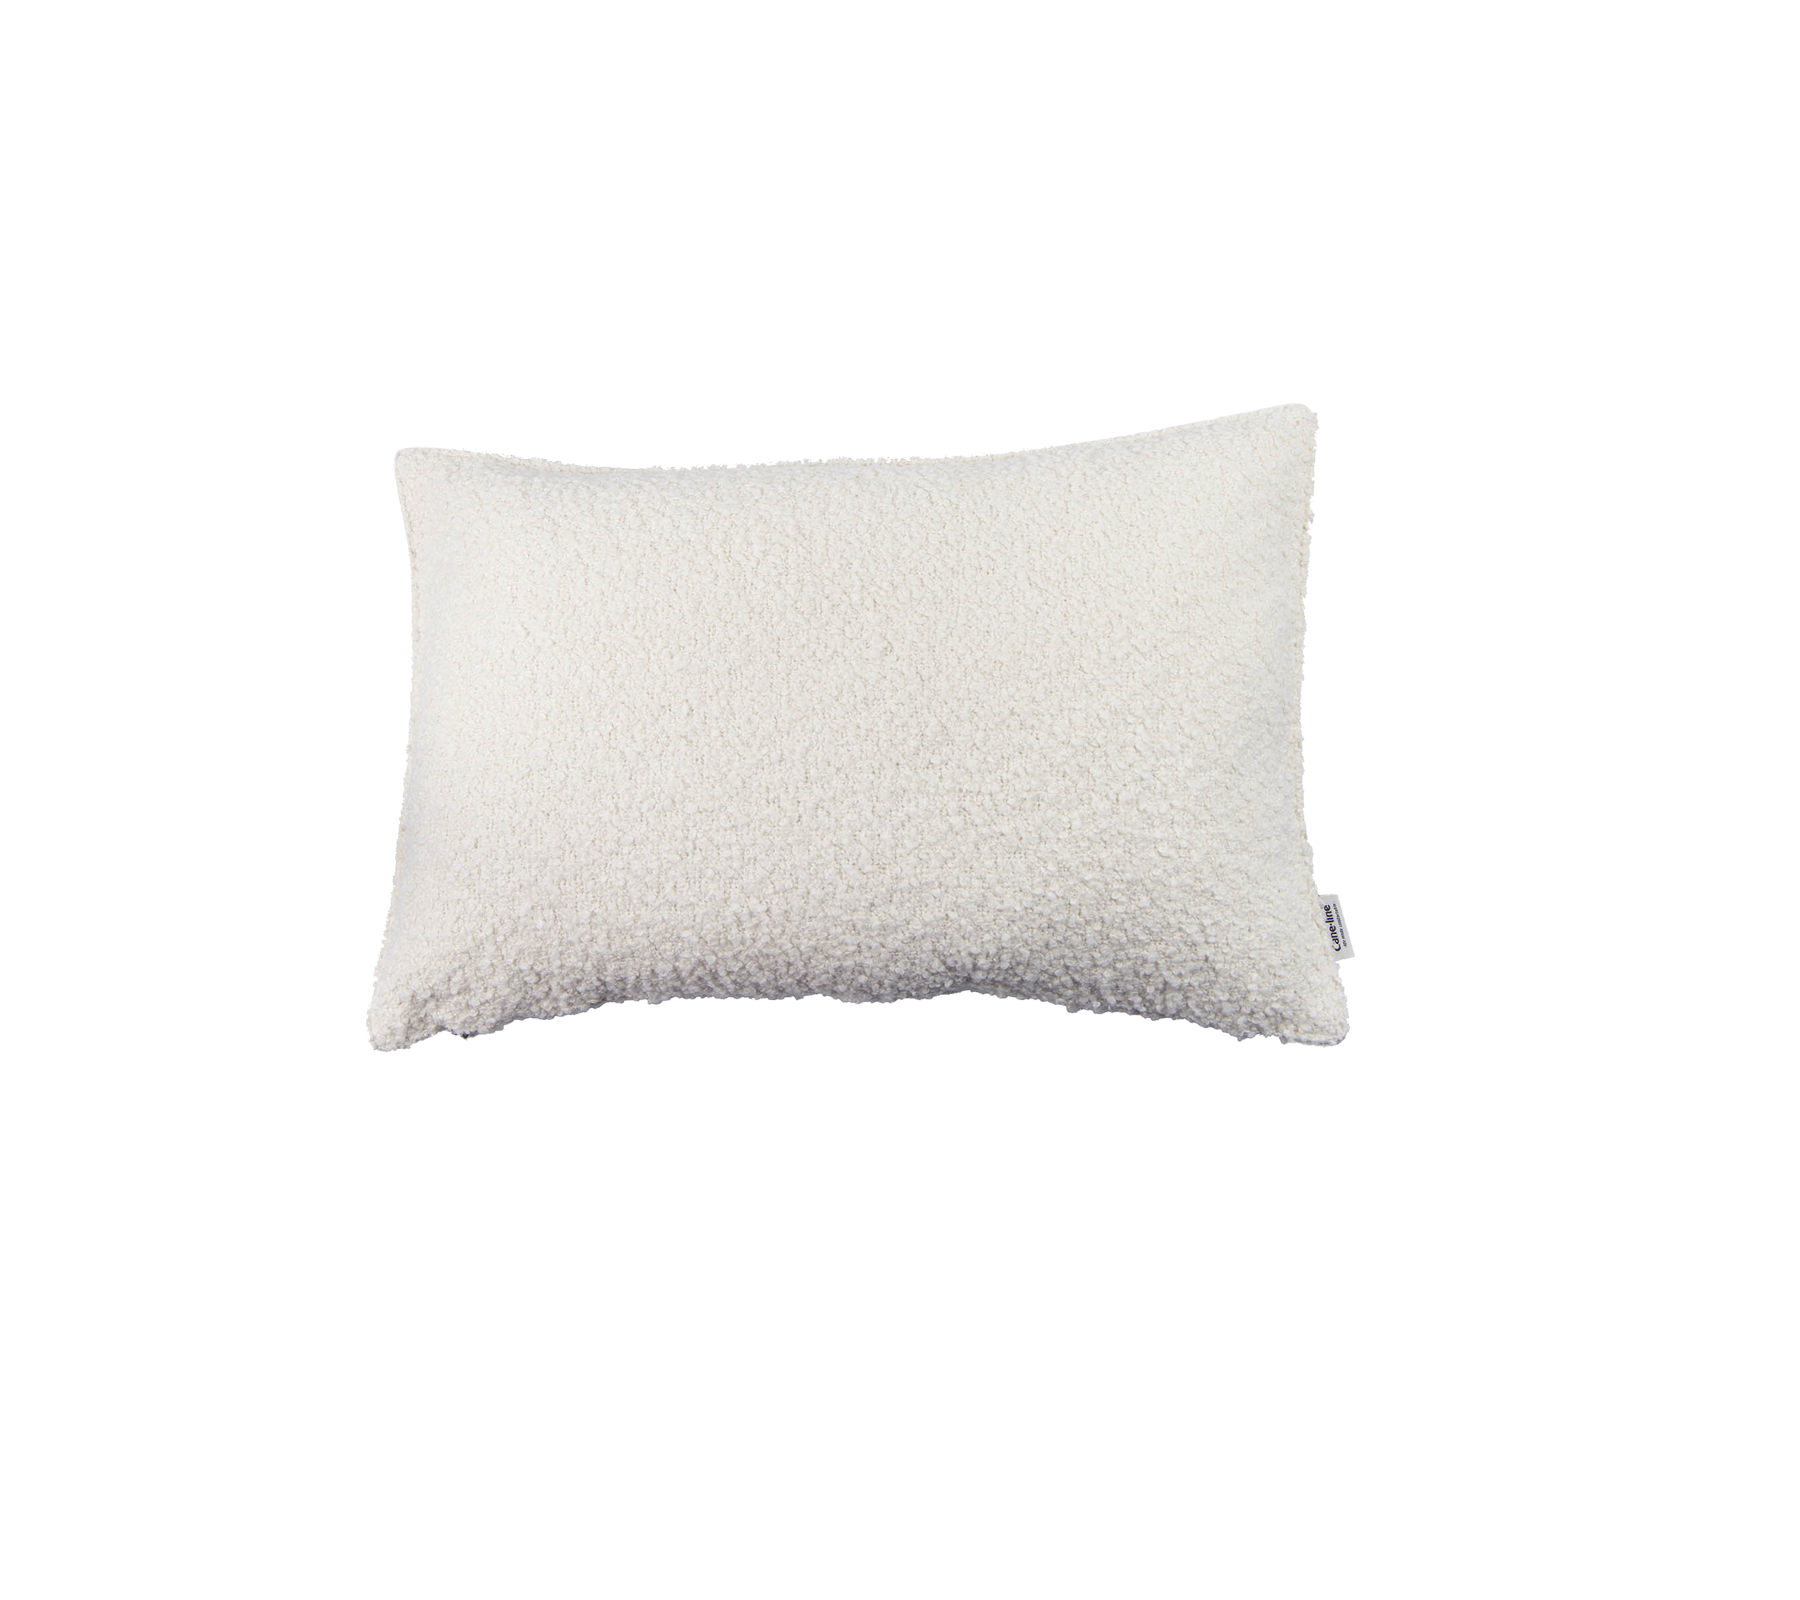 Scent scatter cushion, 40x60 cm